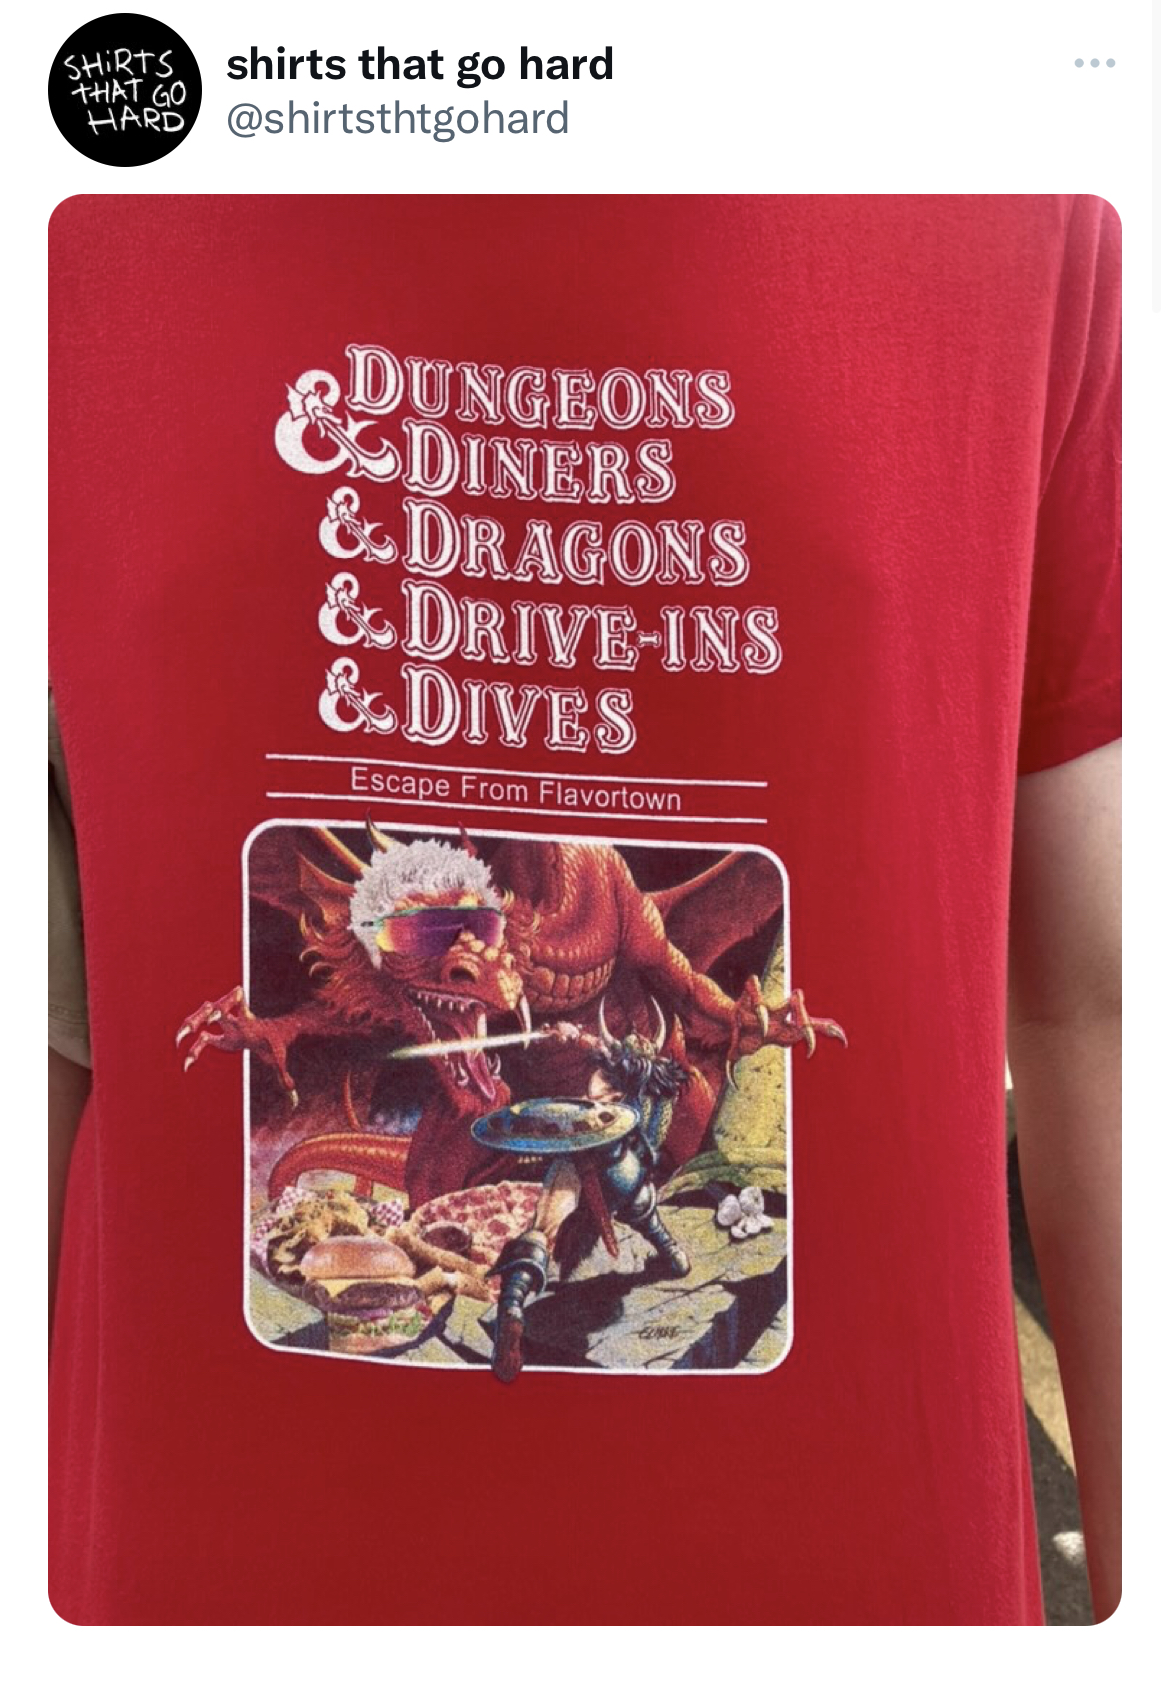 filthy and funny tweet - dungeons and diners and dragons - Shirts shirts that go hard That Go Hard Dungeons Diners & Dragons & DriveIns & Dives Escape From Flavortown